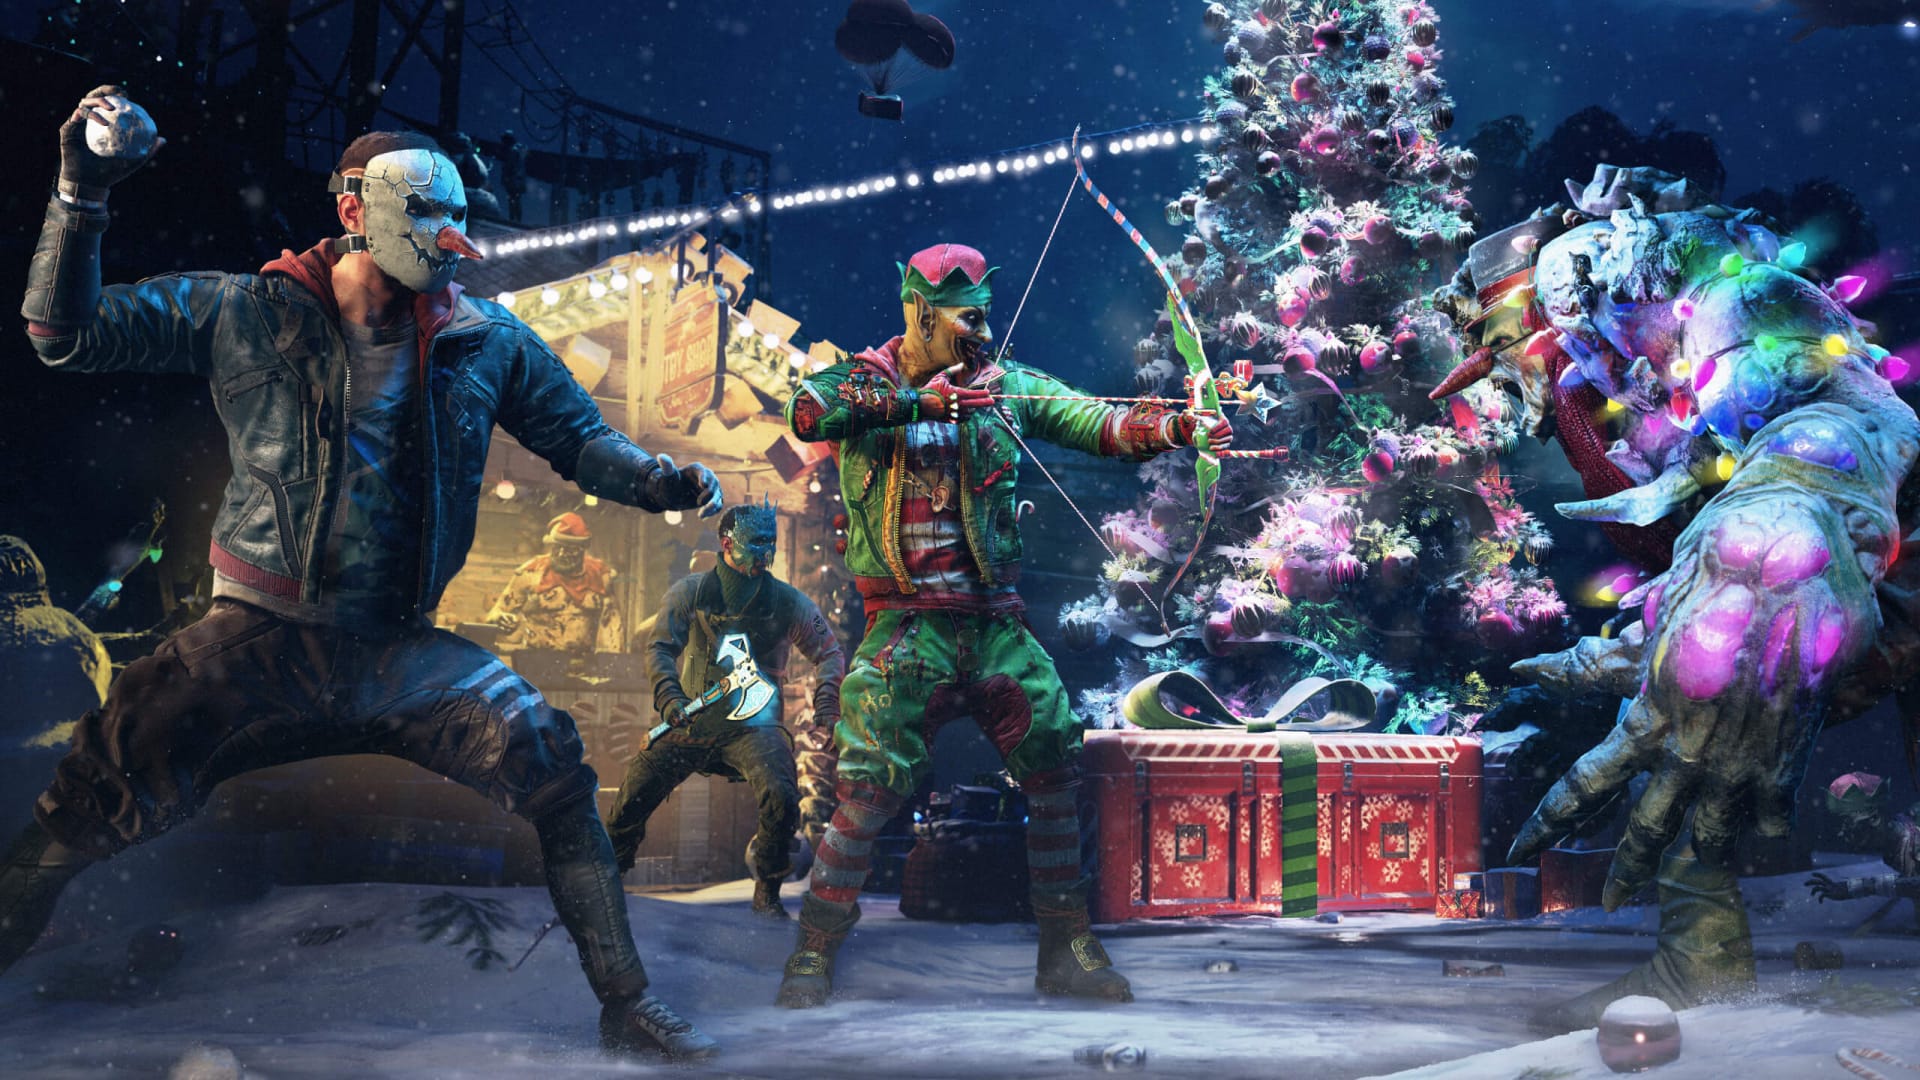 Dying Light 2 Winter Update to Bring Festive Content and More Next Week